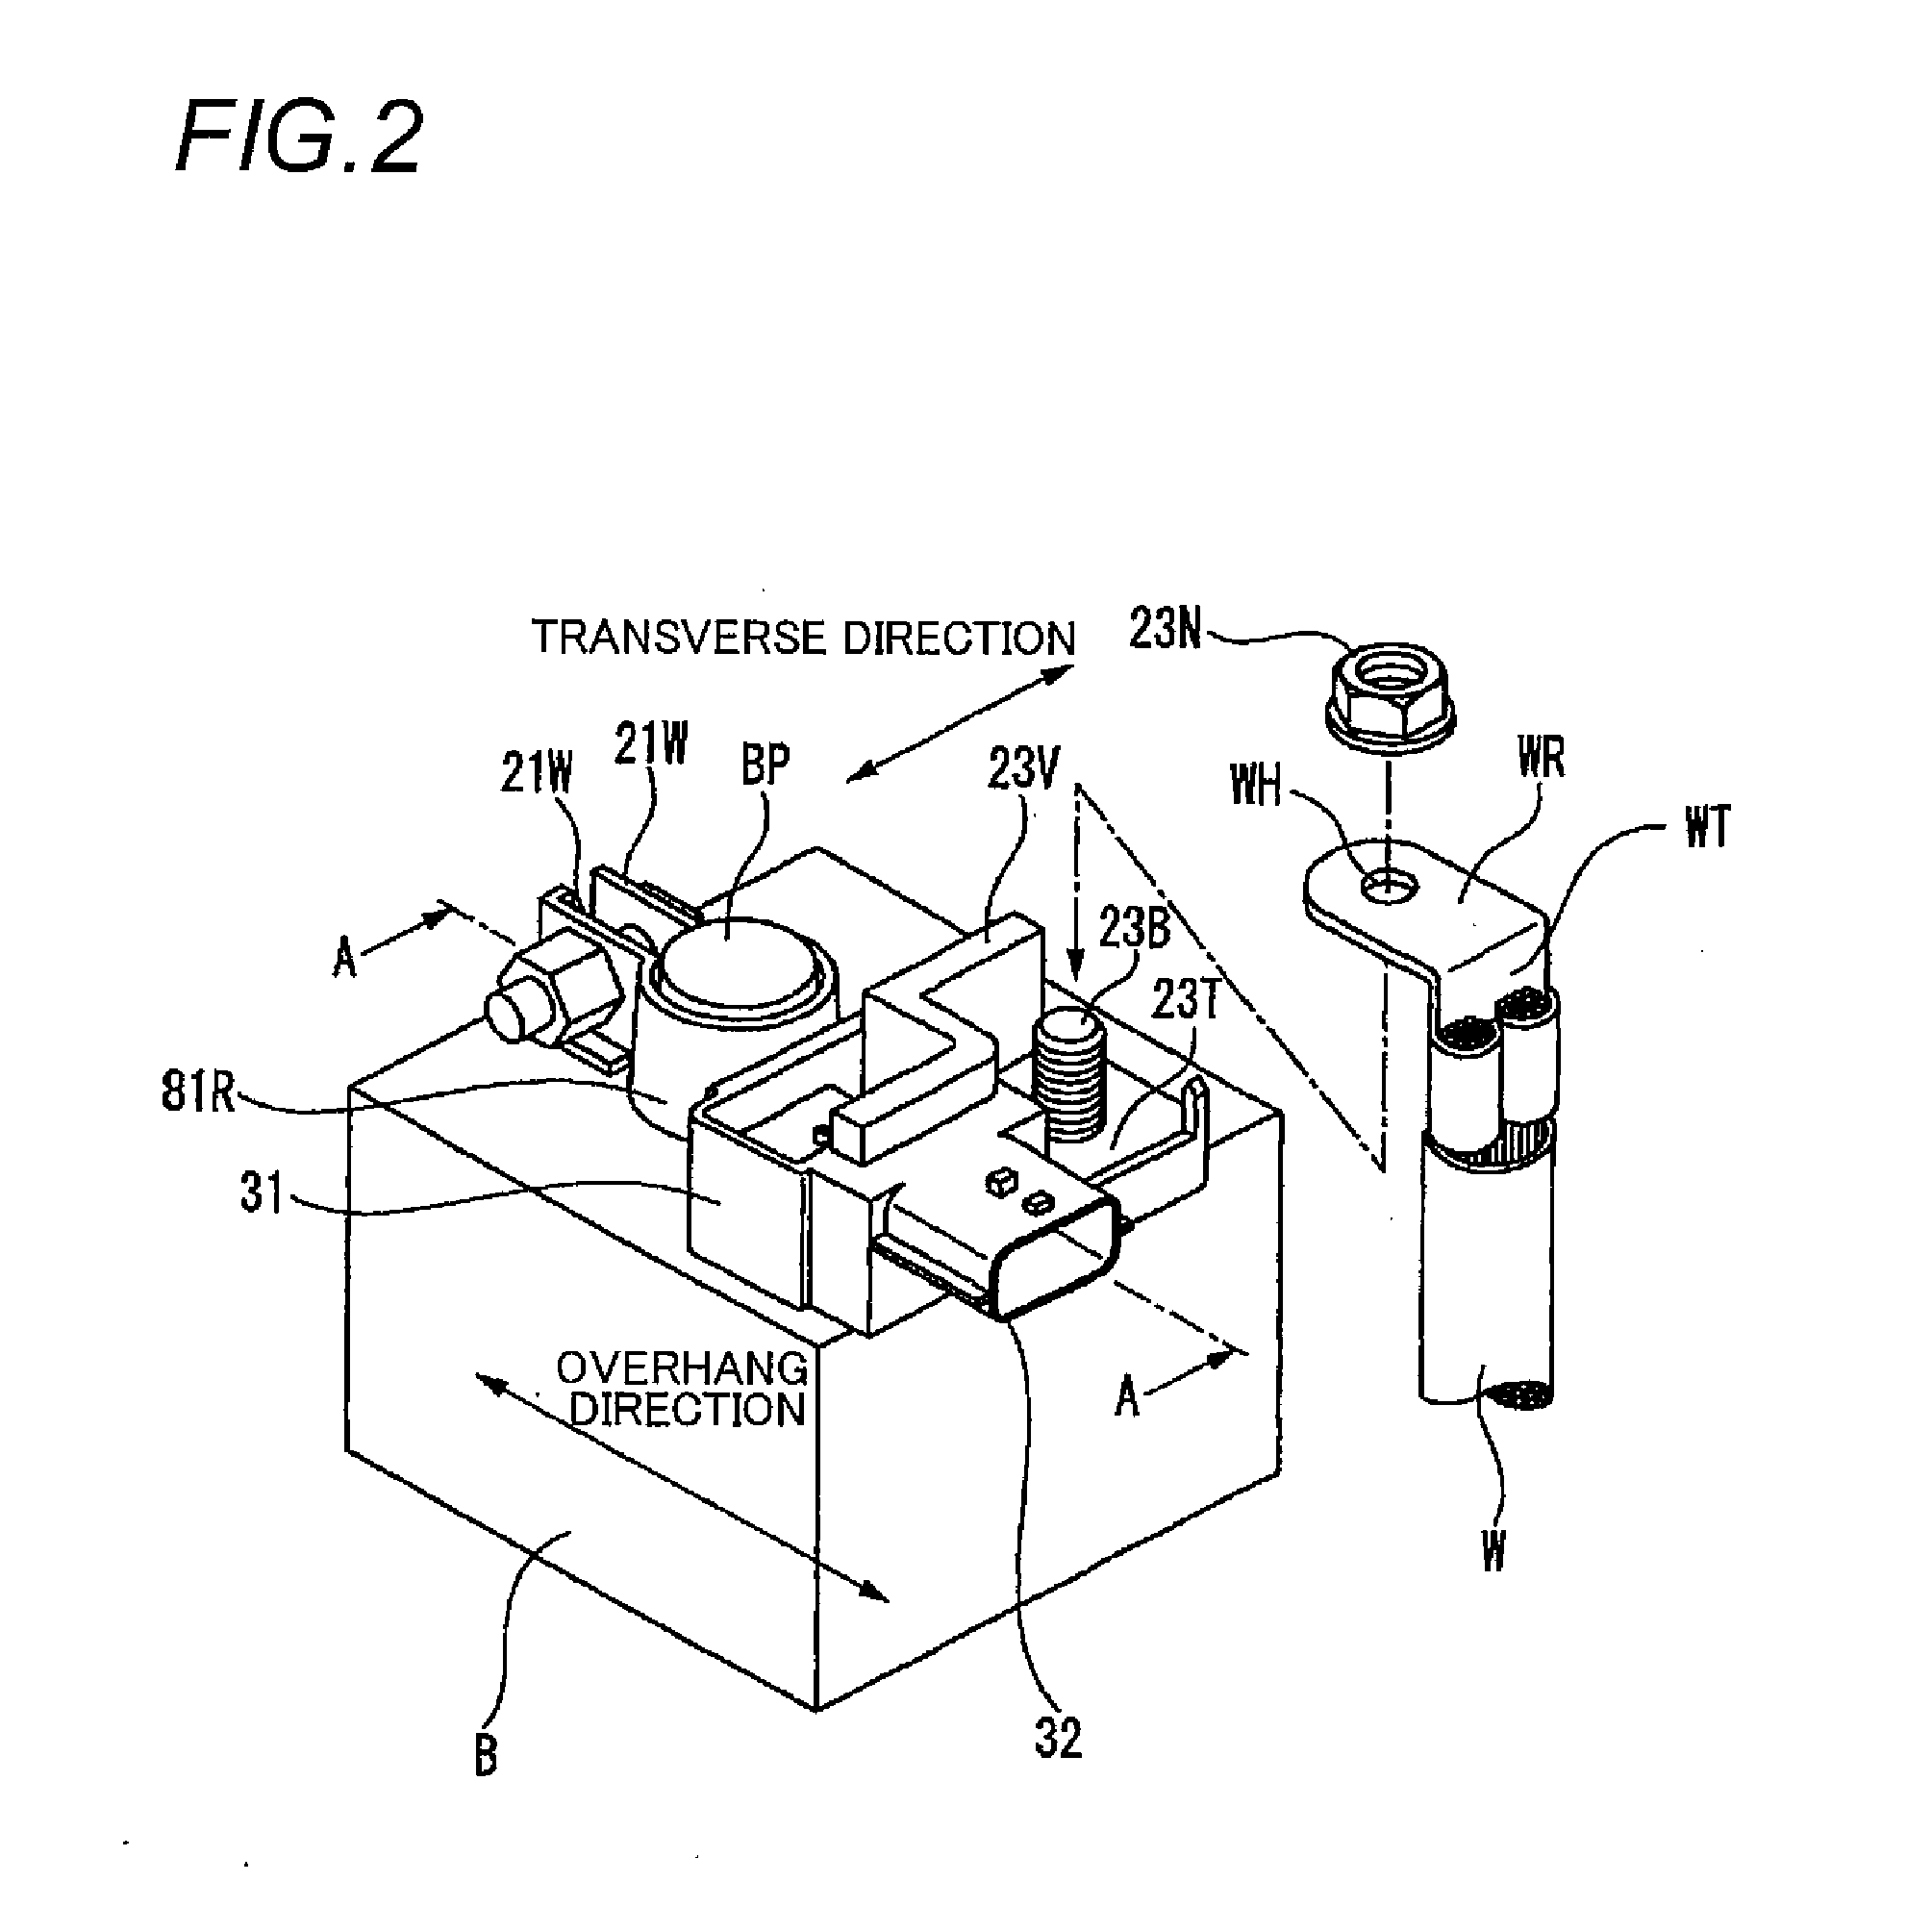 Battery terminal unit with current sensor